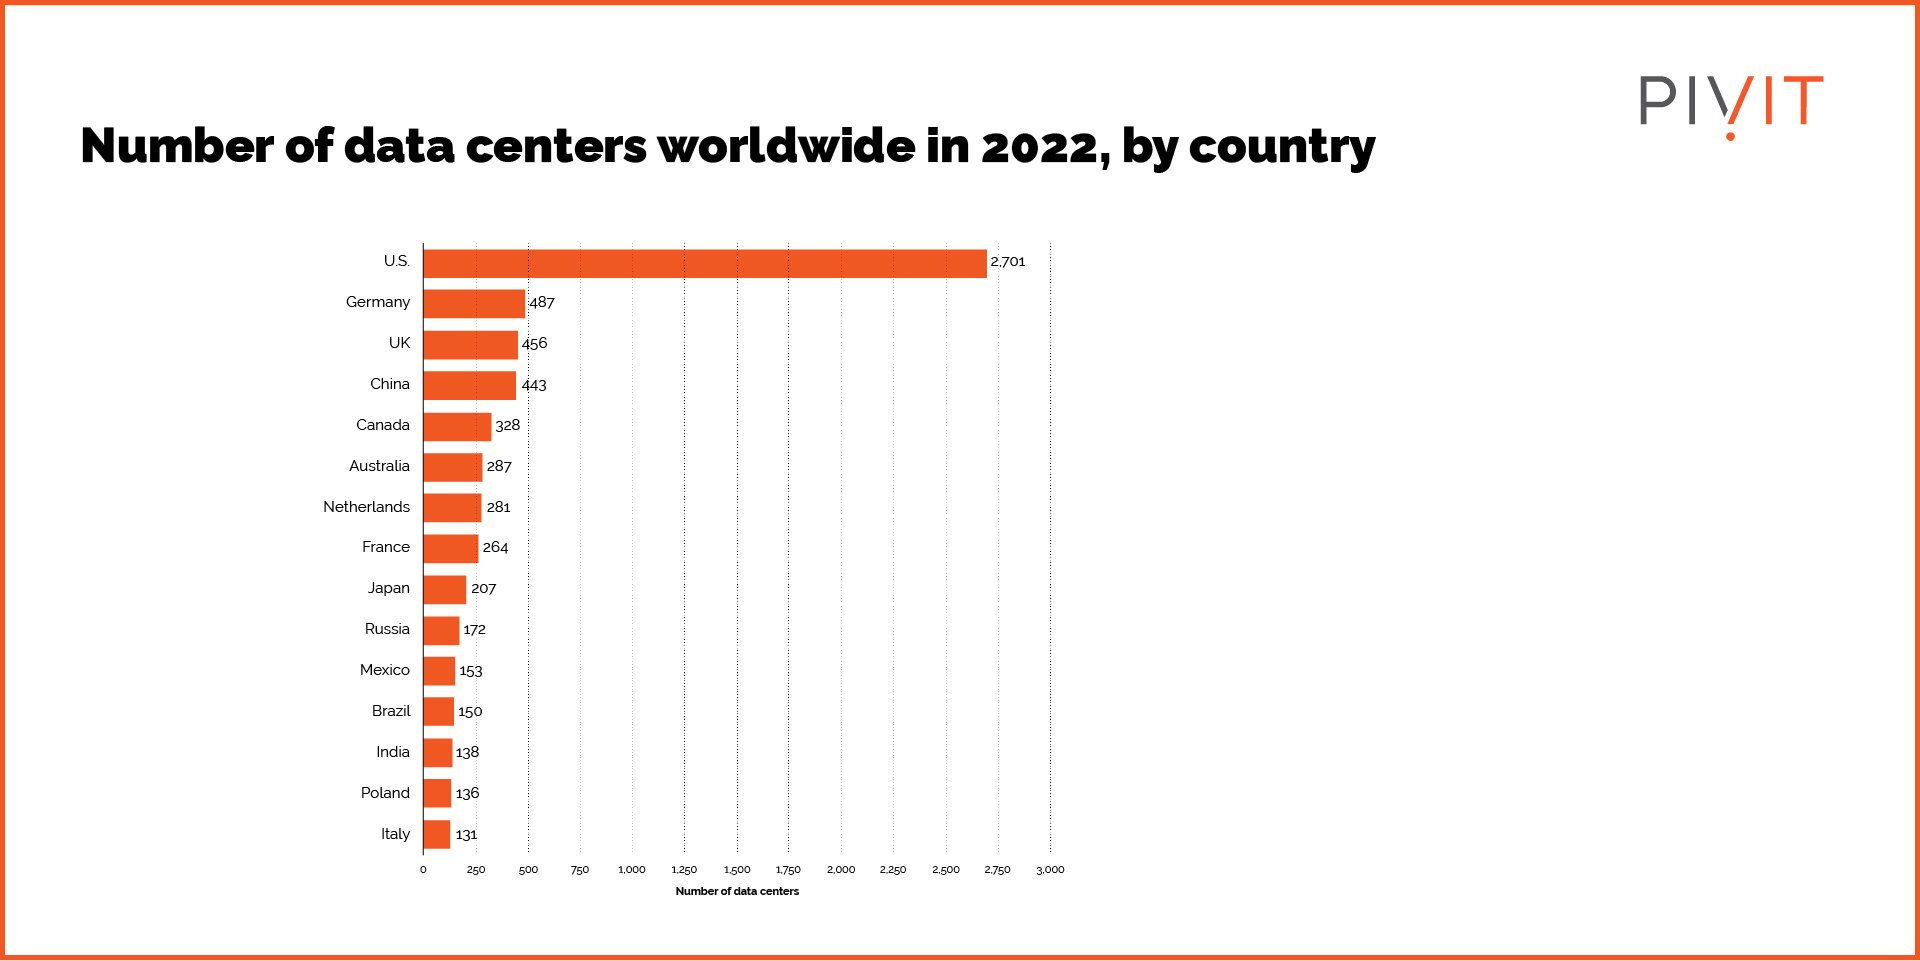 Number of data centers worldwide in 2022 sorted by country